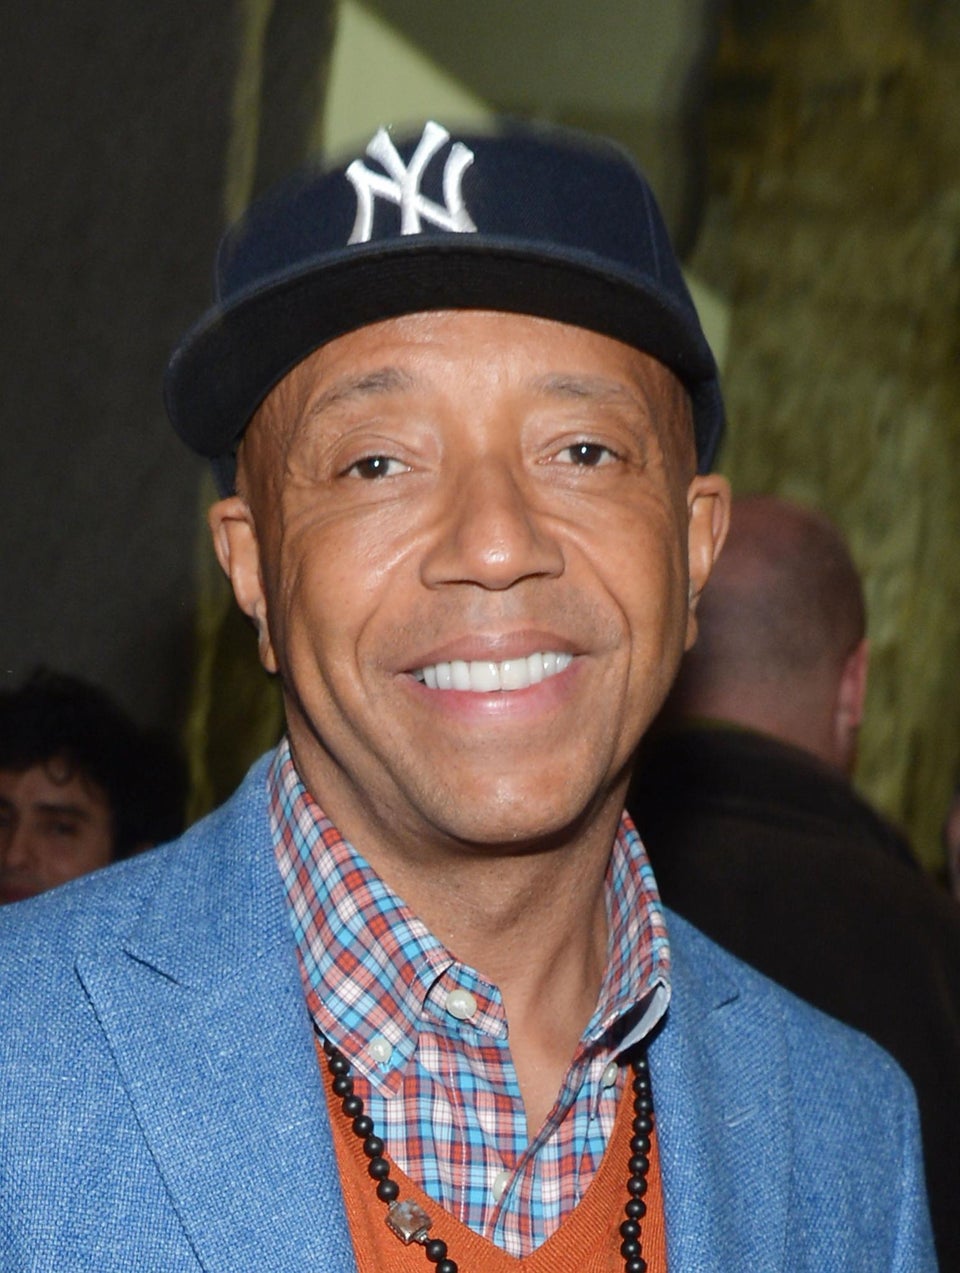 Russell Simmons Tells Donald Trump to ‘Stop the BS’